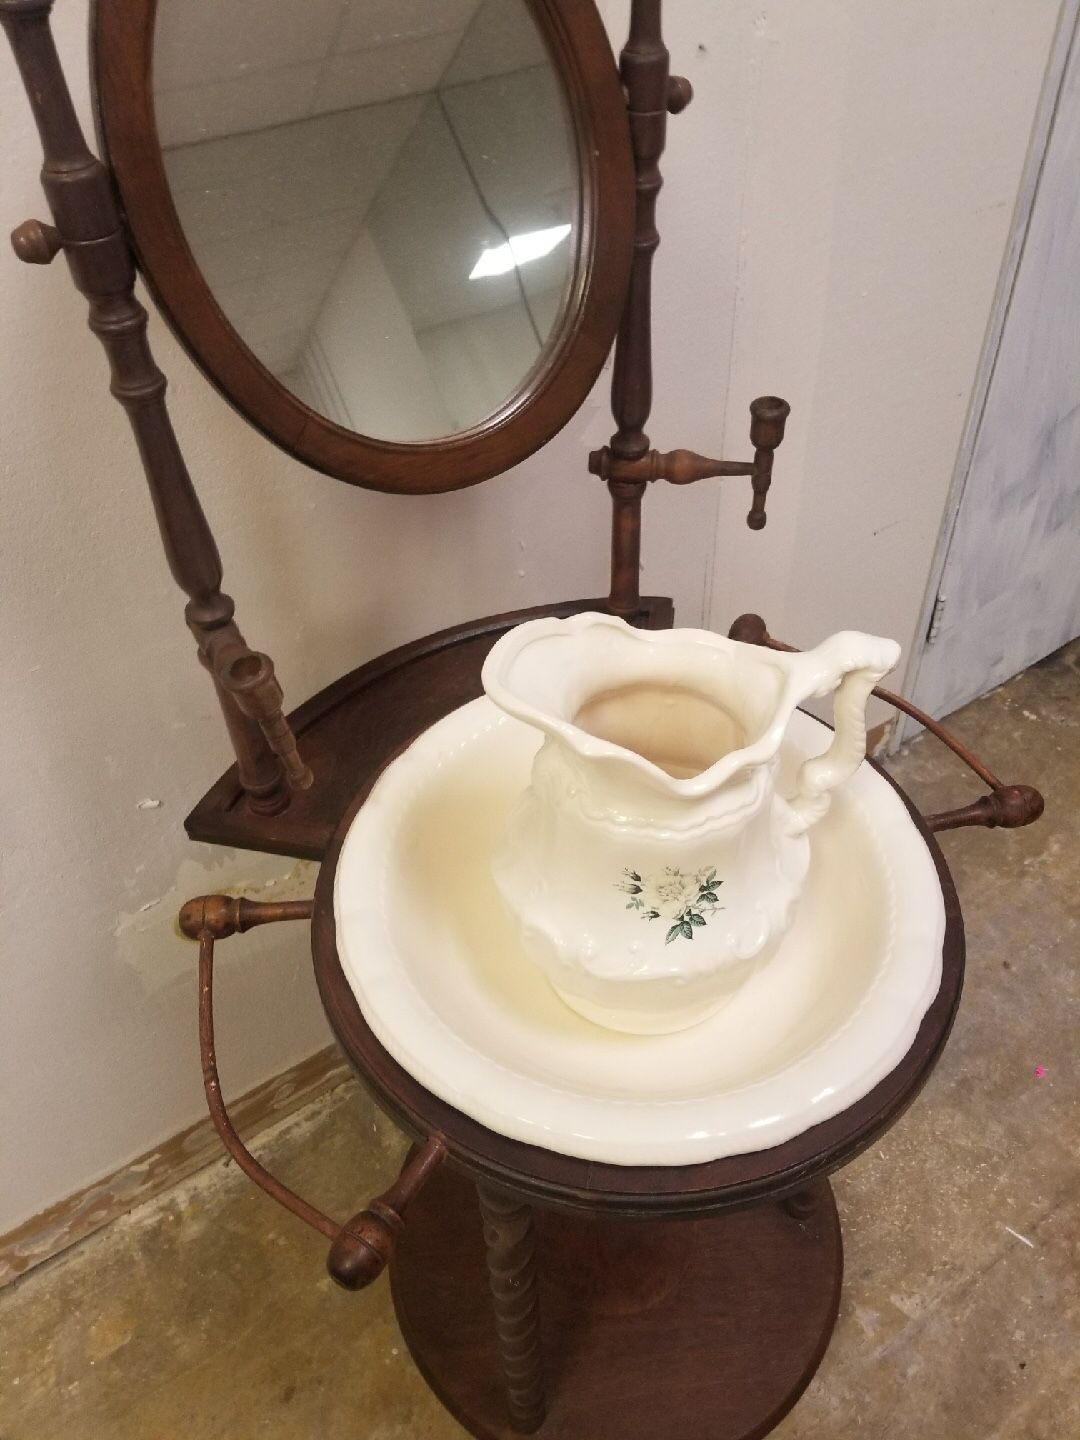 Antique Wash Stand with Bowl & Ewer (Pitcher)